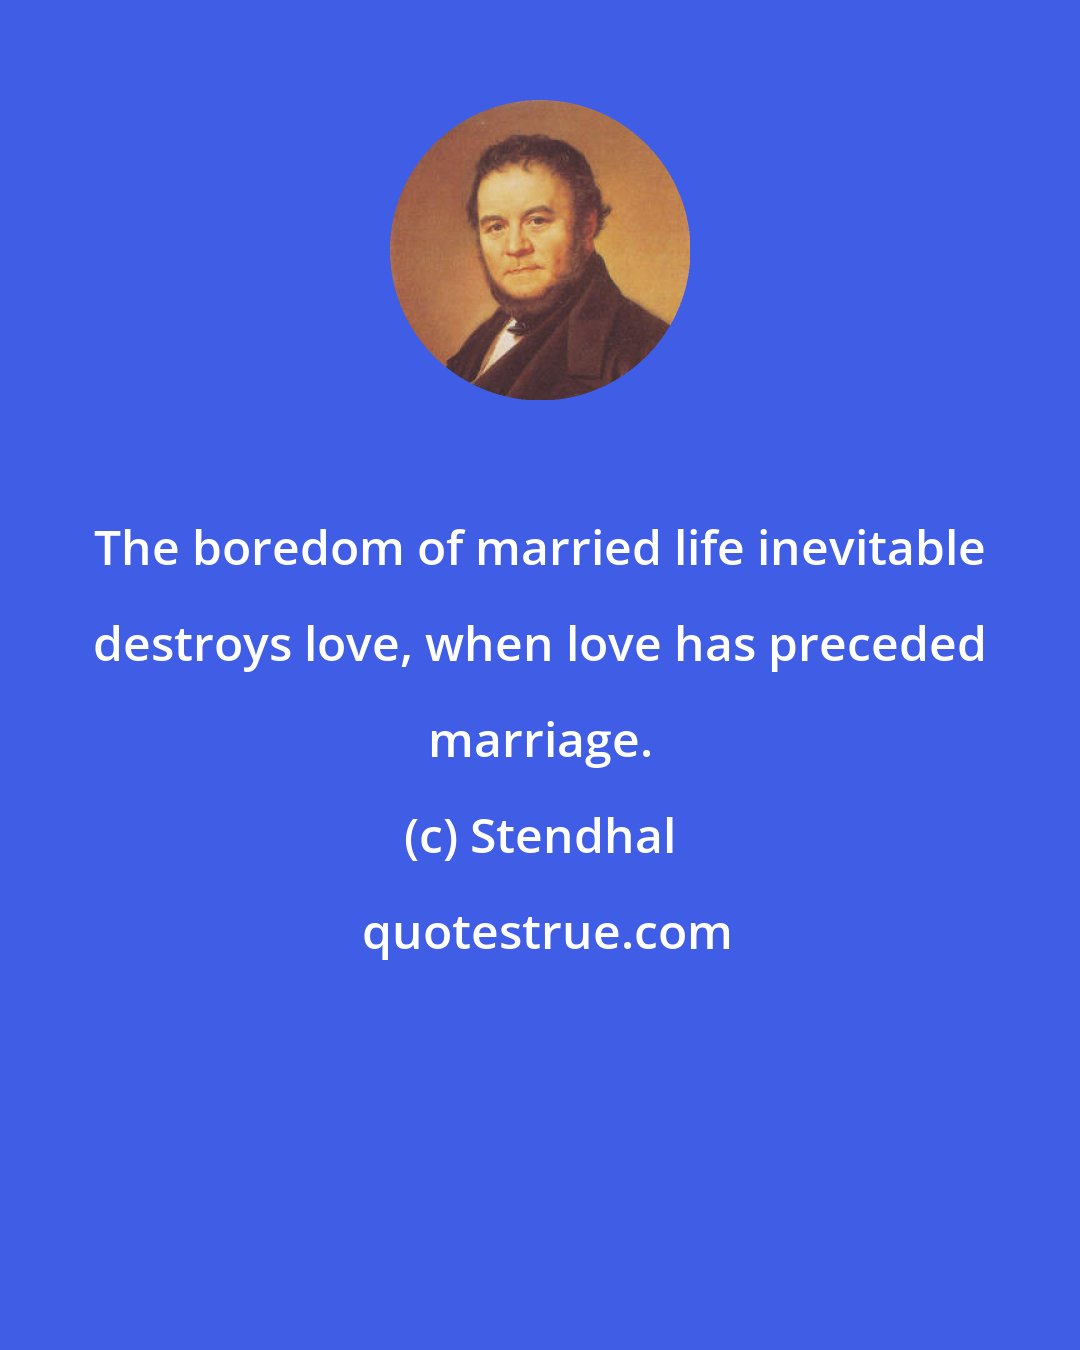 Stendhal: The boredom of married life inevitable destroys love, when love has preceded marriage.